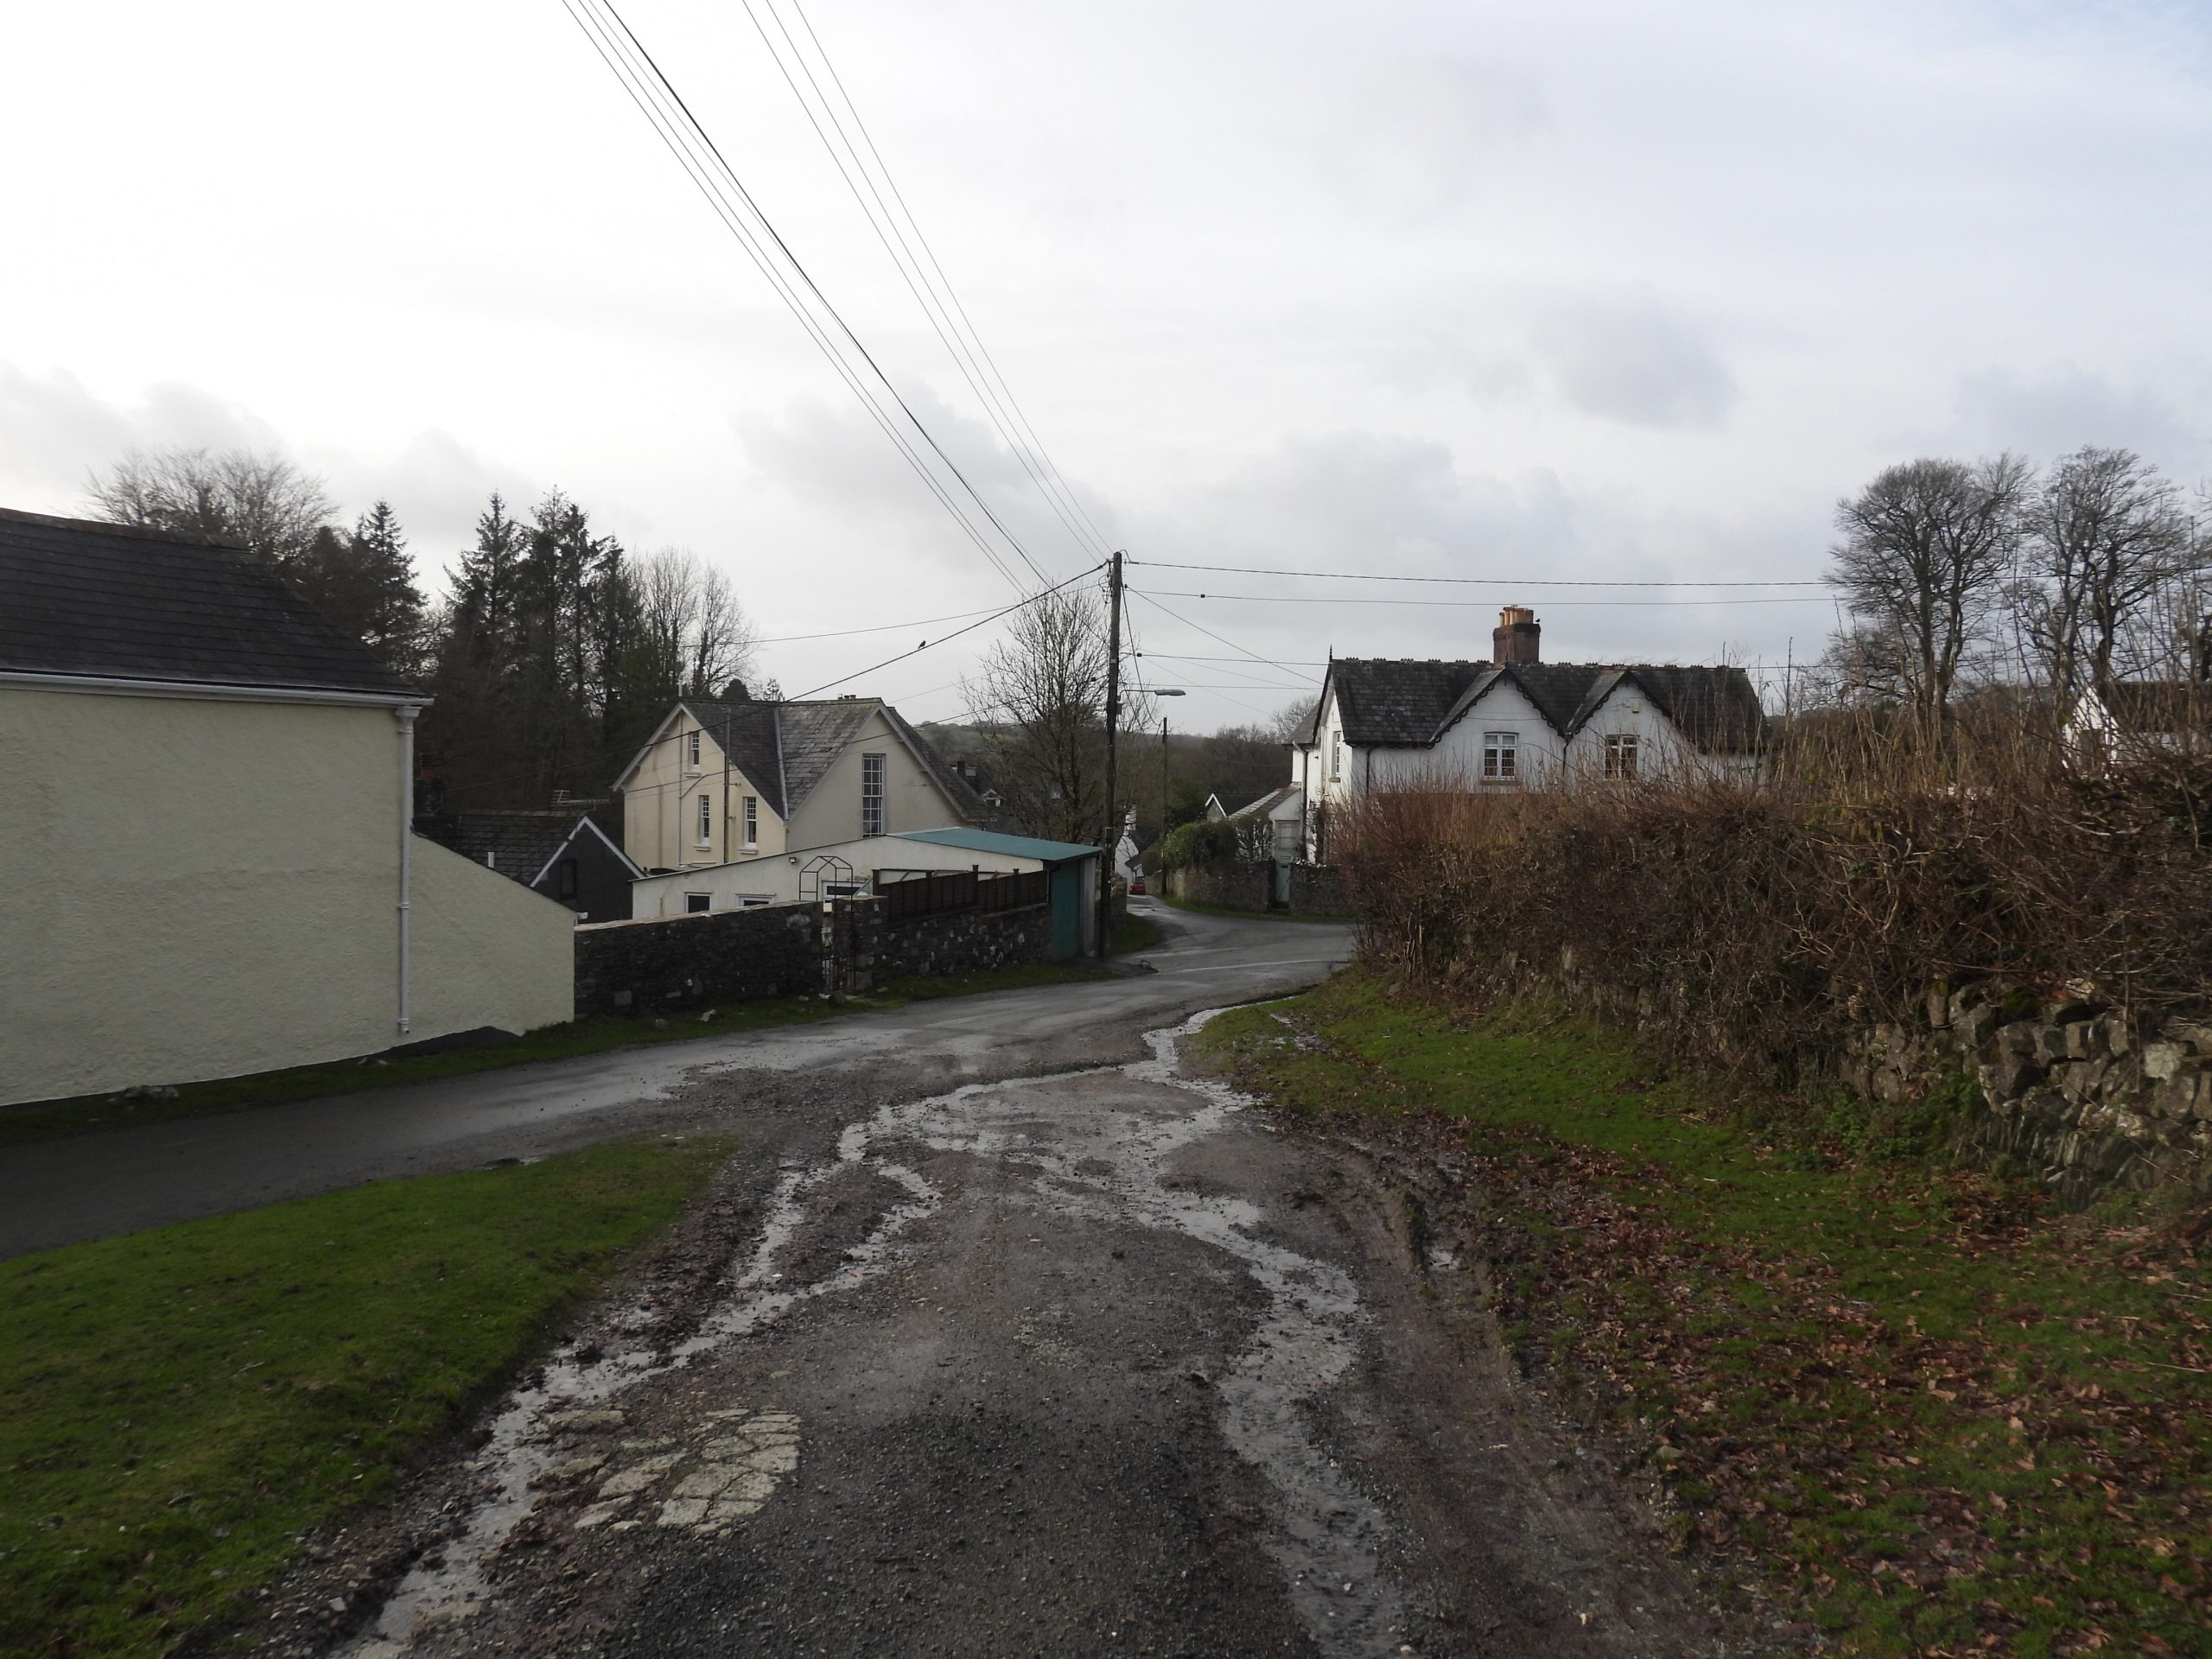 19. Middle Moor Village a